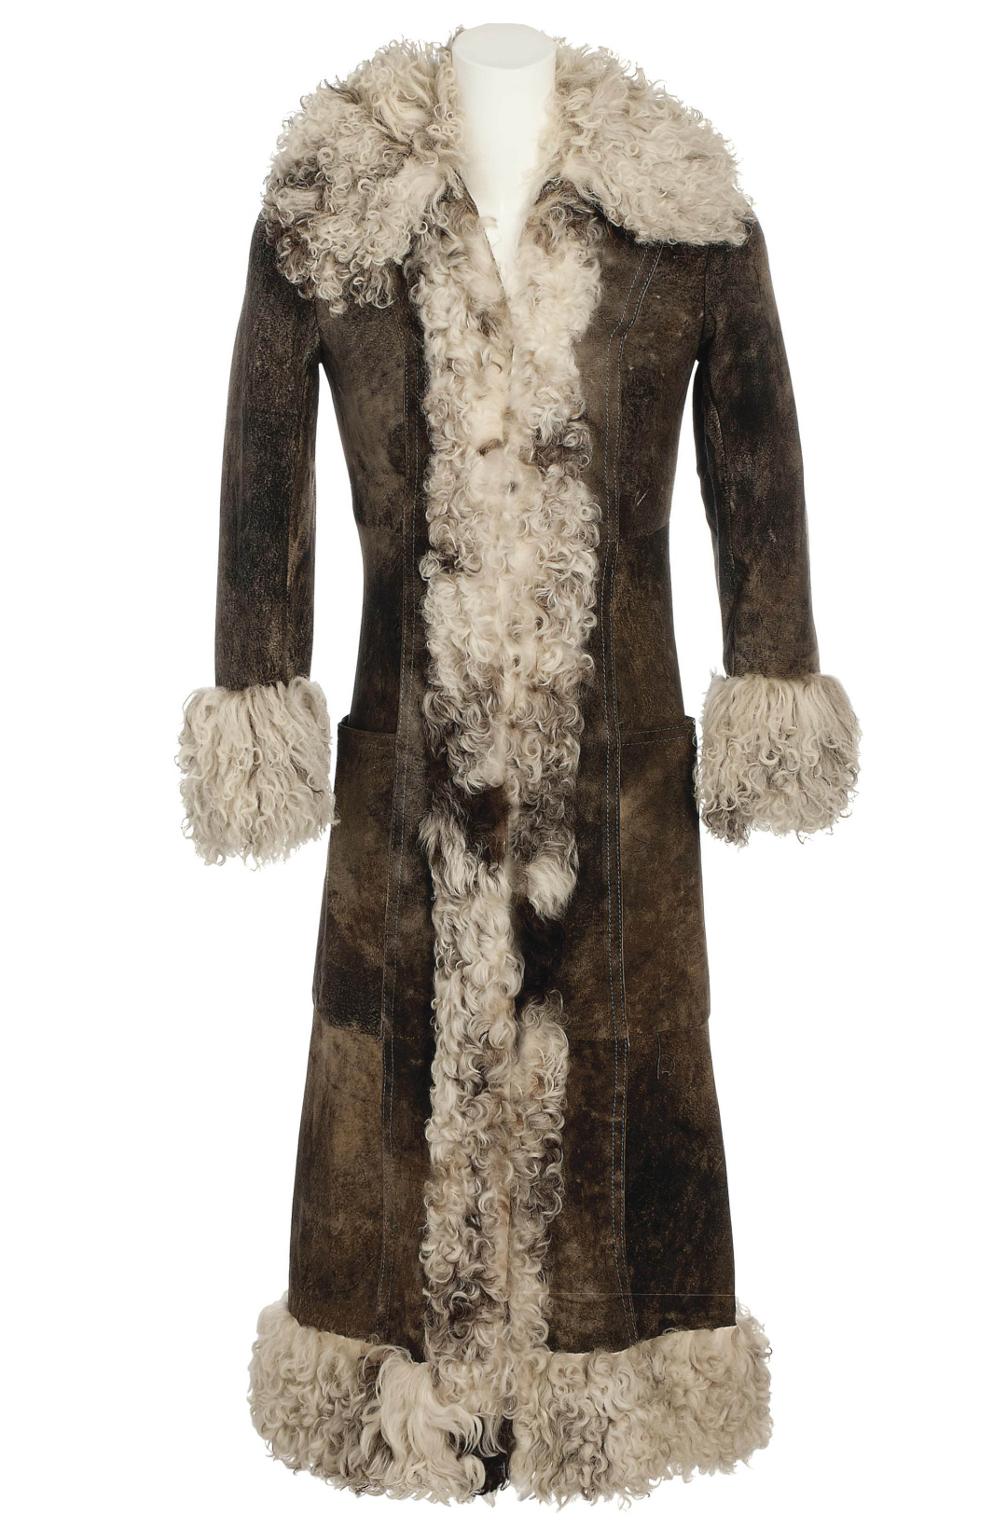 - Your chance to own T. Rex frontman Marc Bolan's personally owned and worn Afghan coat. 

This three-quarter-length Afghan coat features grey patchwork with a pale fleece lining, with hook and eye fastening to the front. 

The coat was owned and